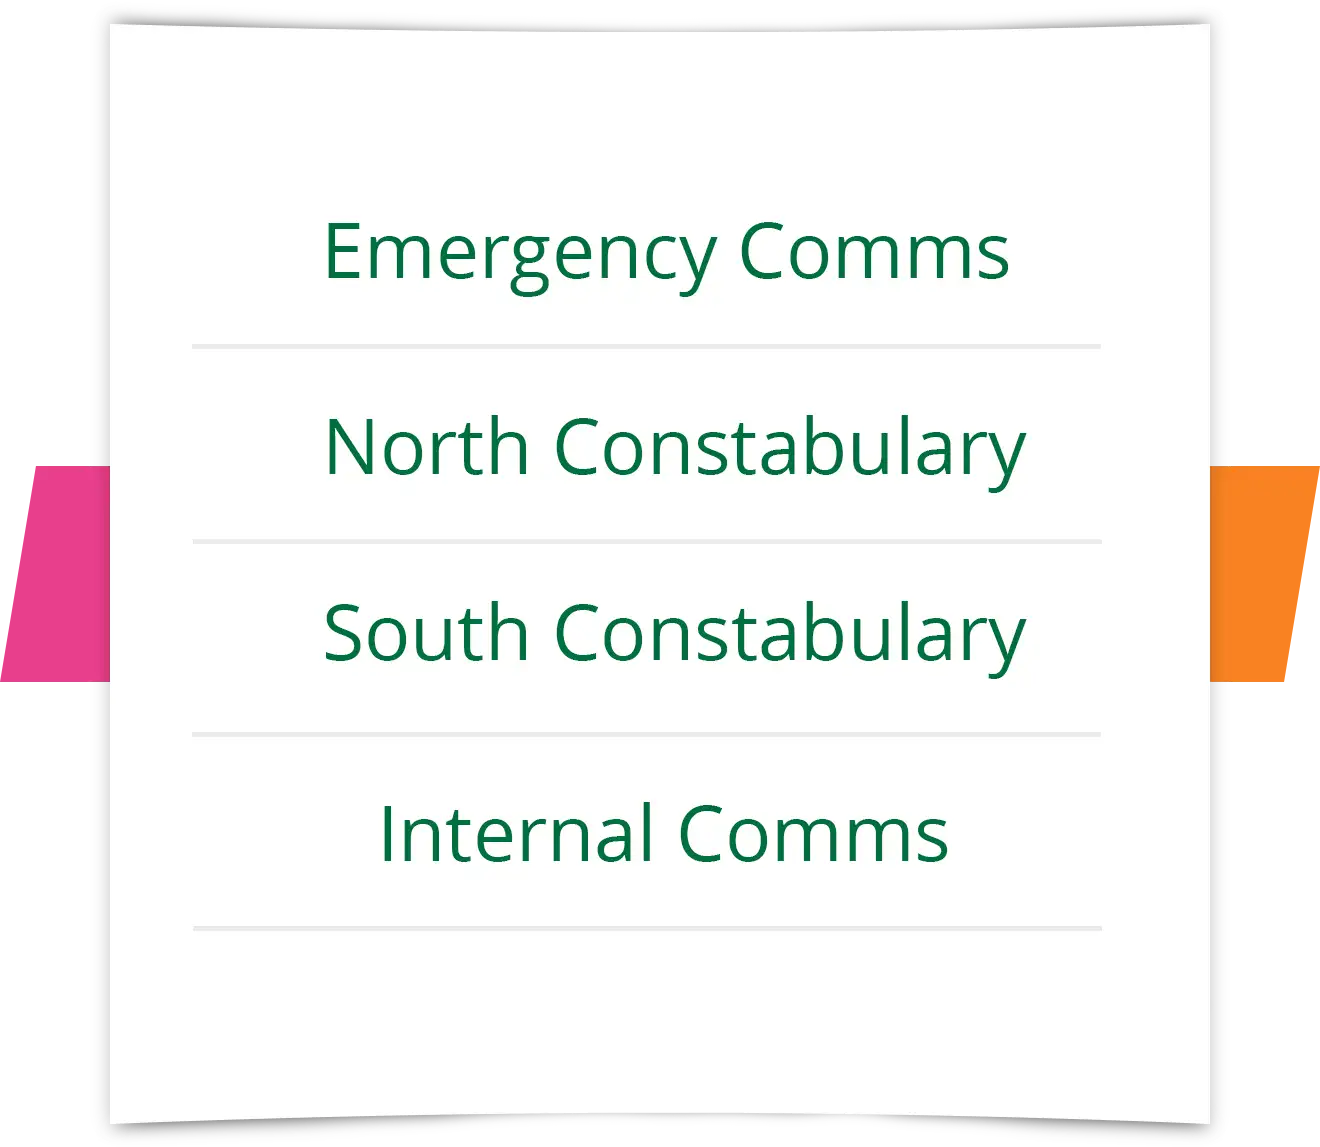 Examples of subaccounts for a Constabulary